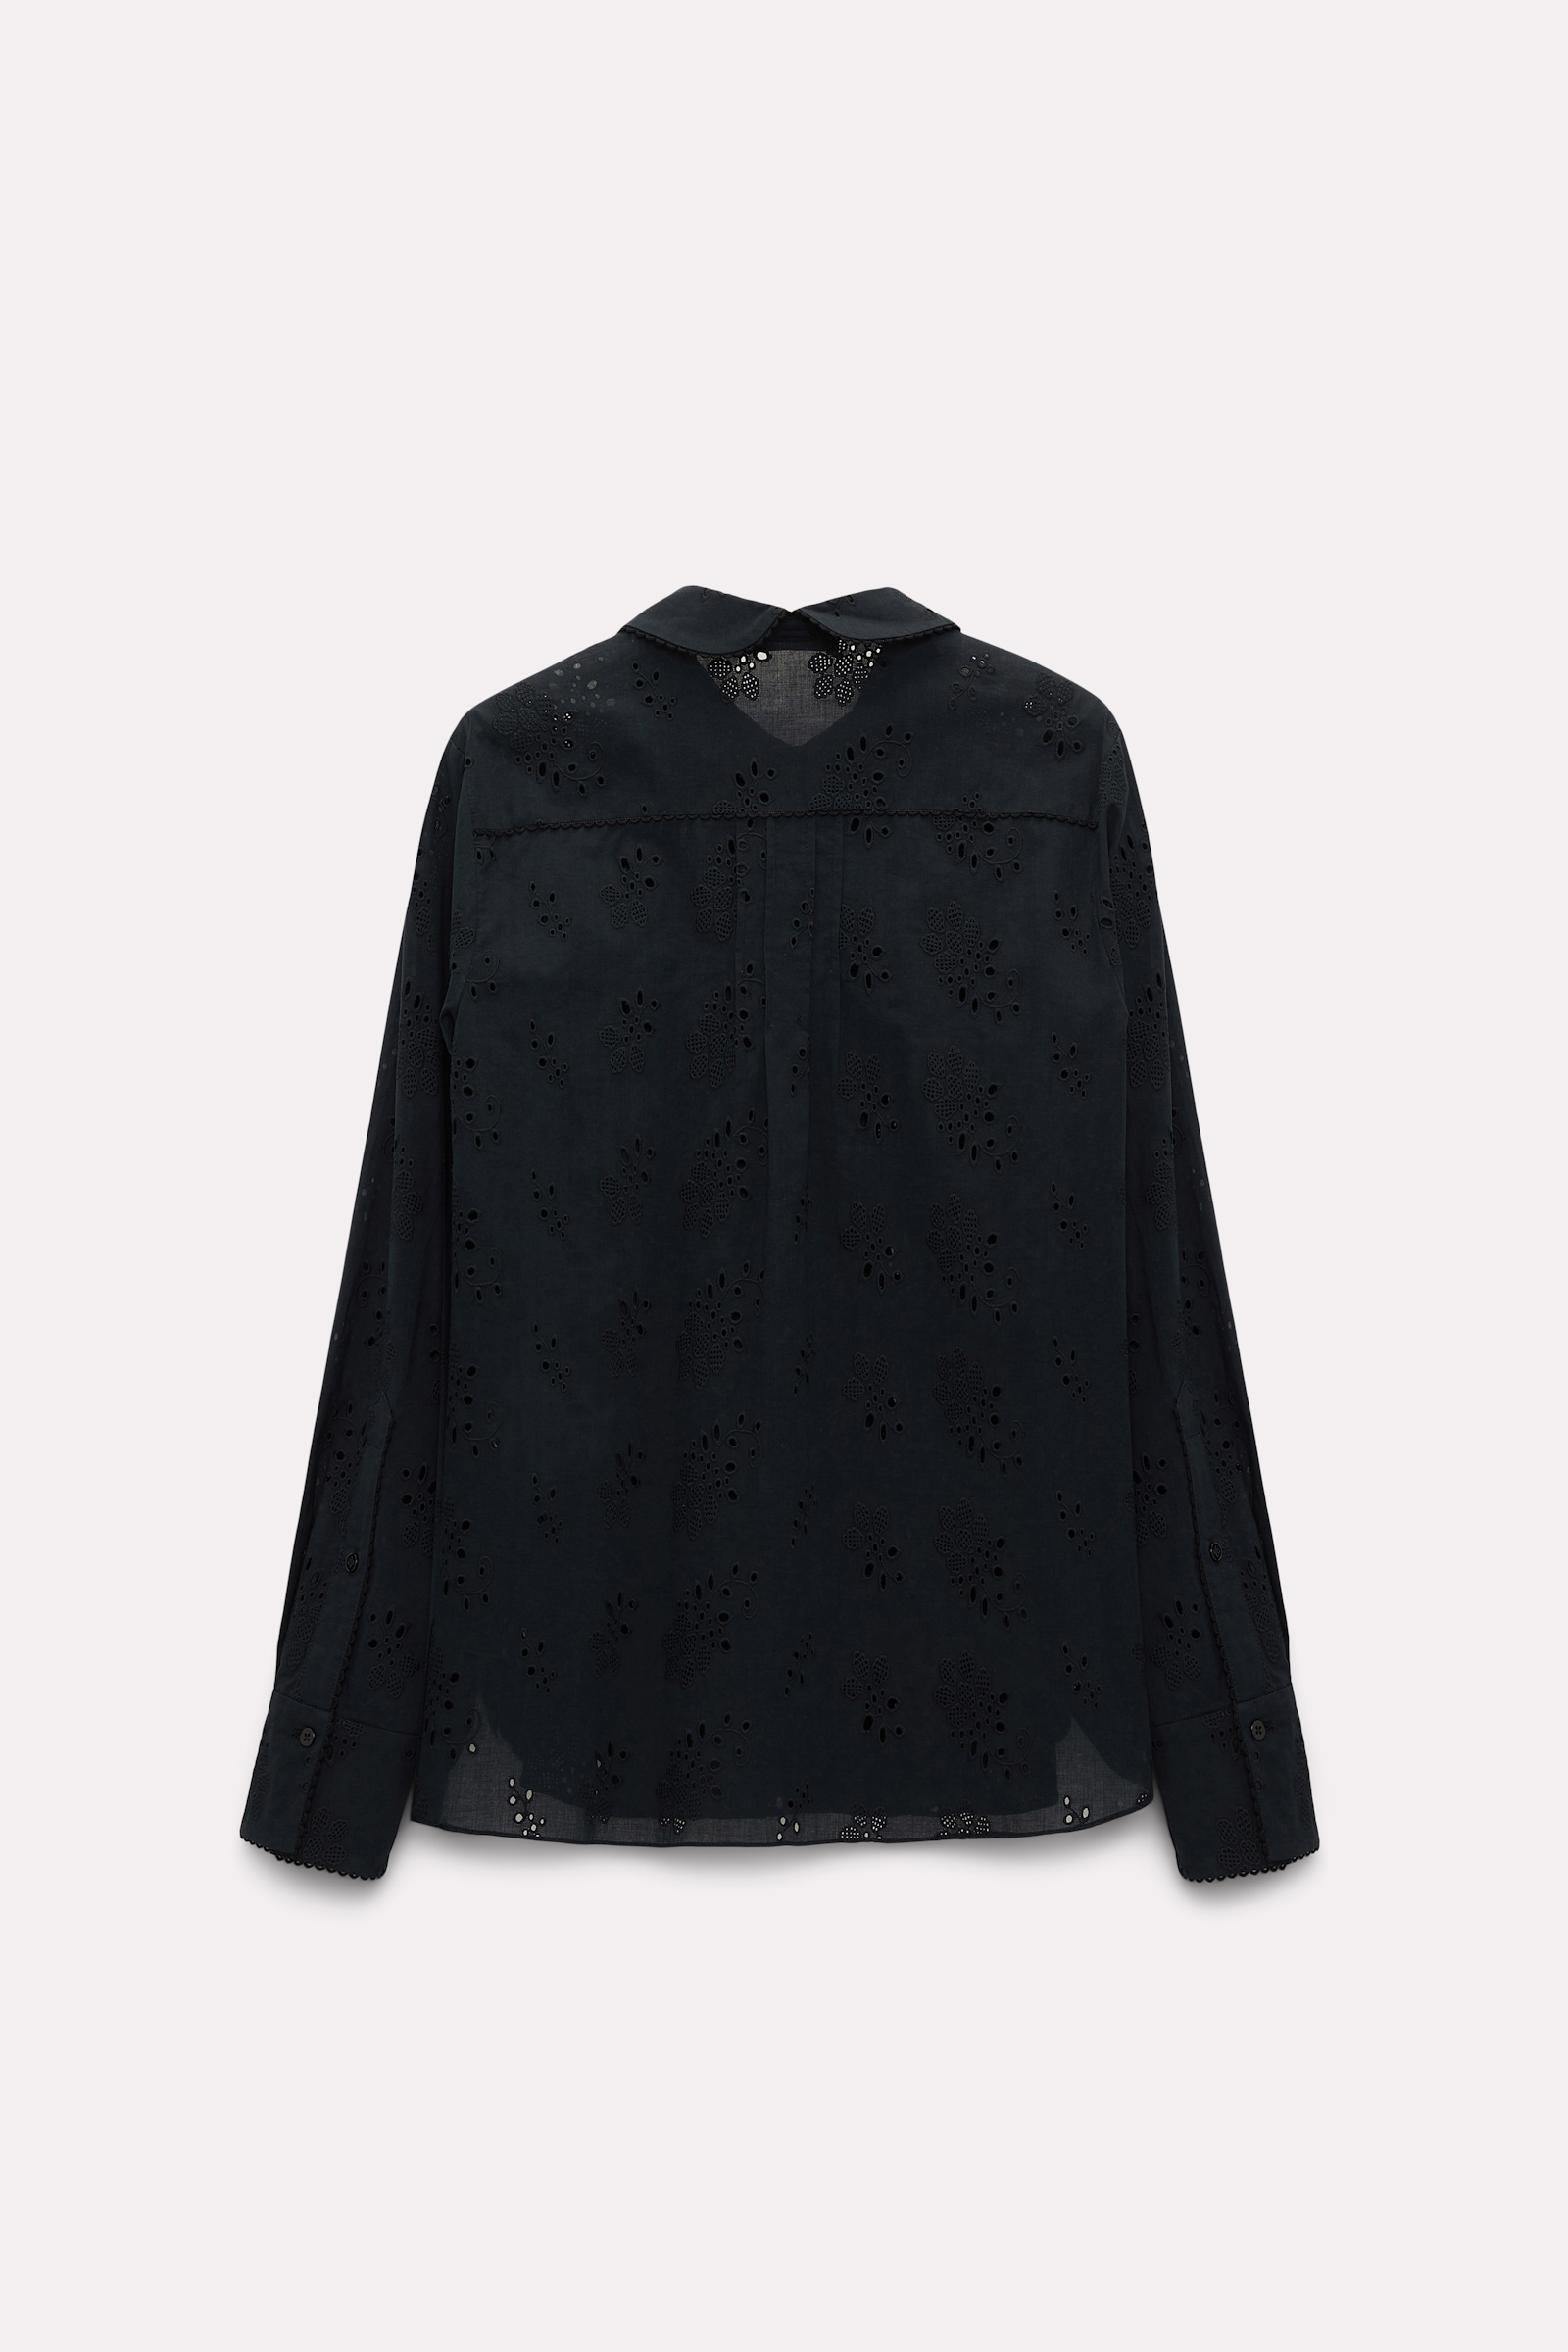 Dorothee Schumacher Blouse in broderie anglaise pure black